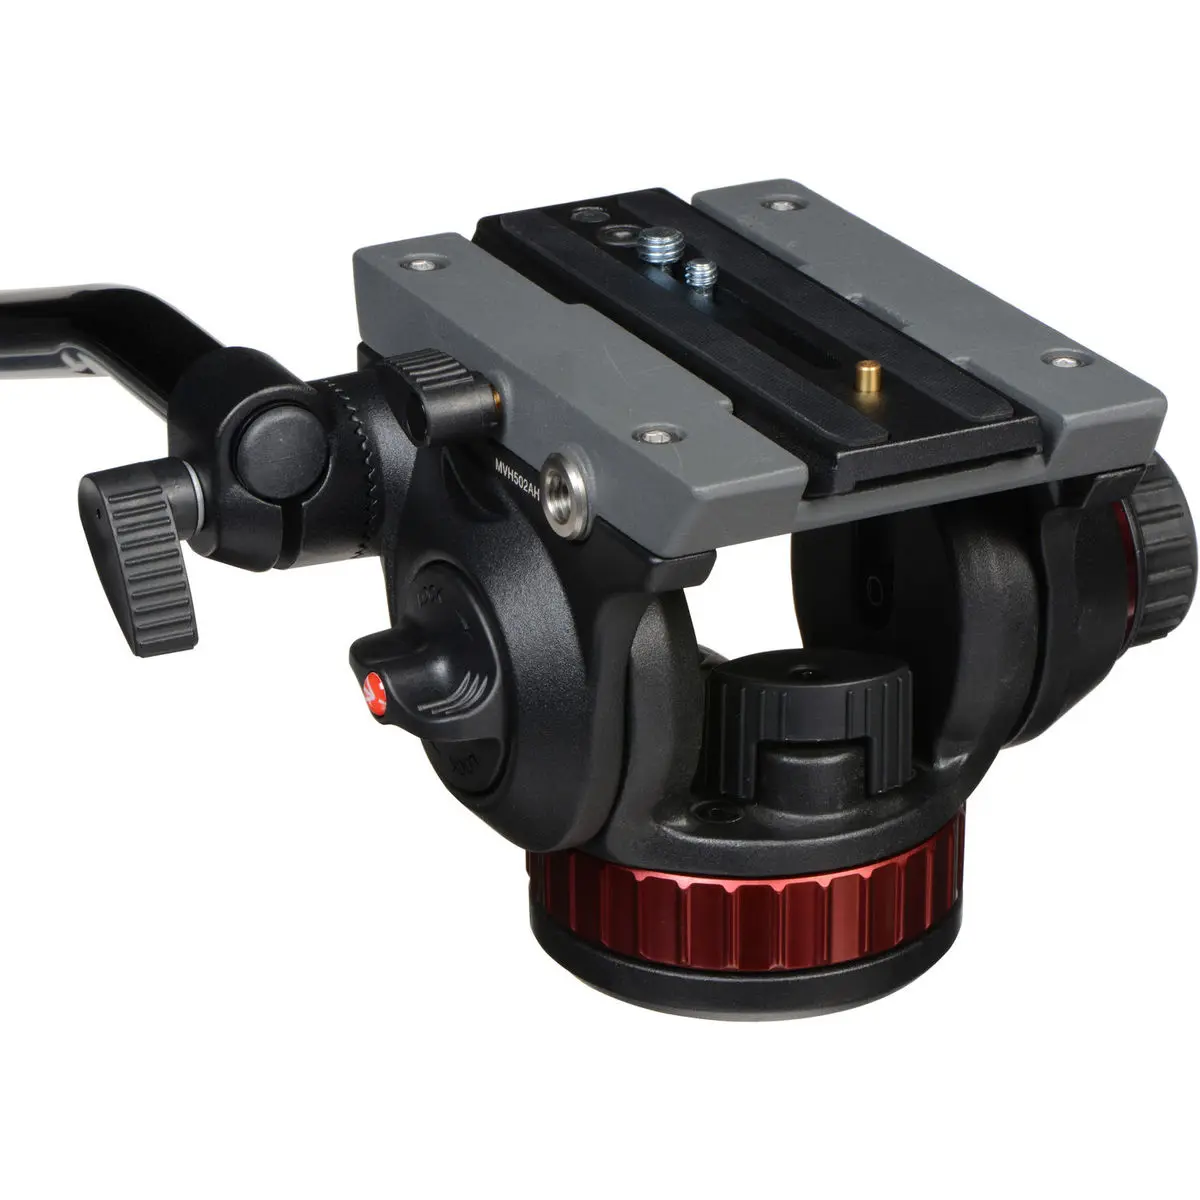 1. Manfrotto MVH502AH Pro Video Head with Flat Base